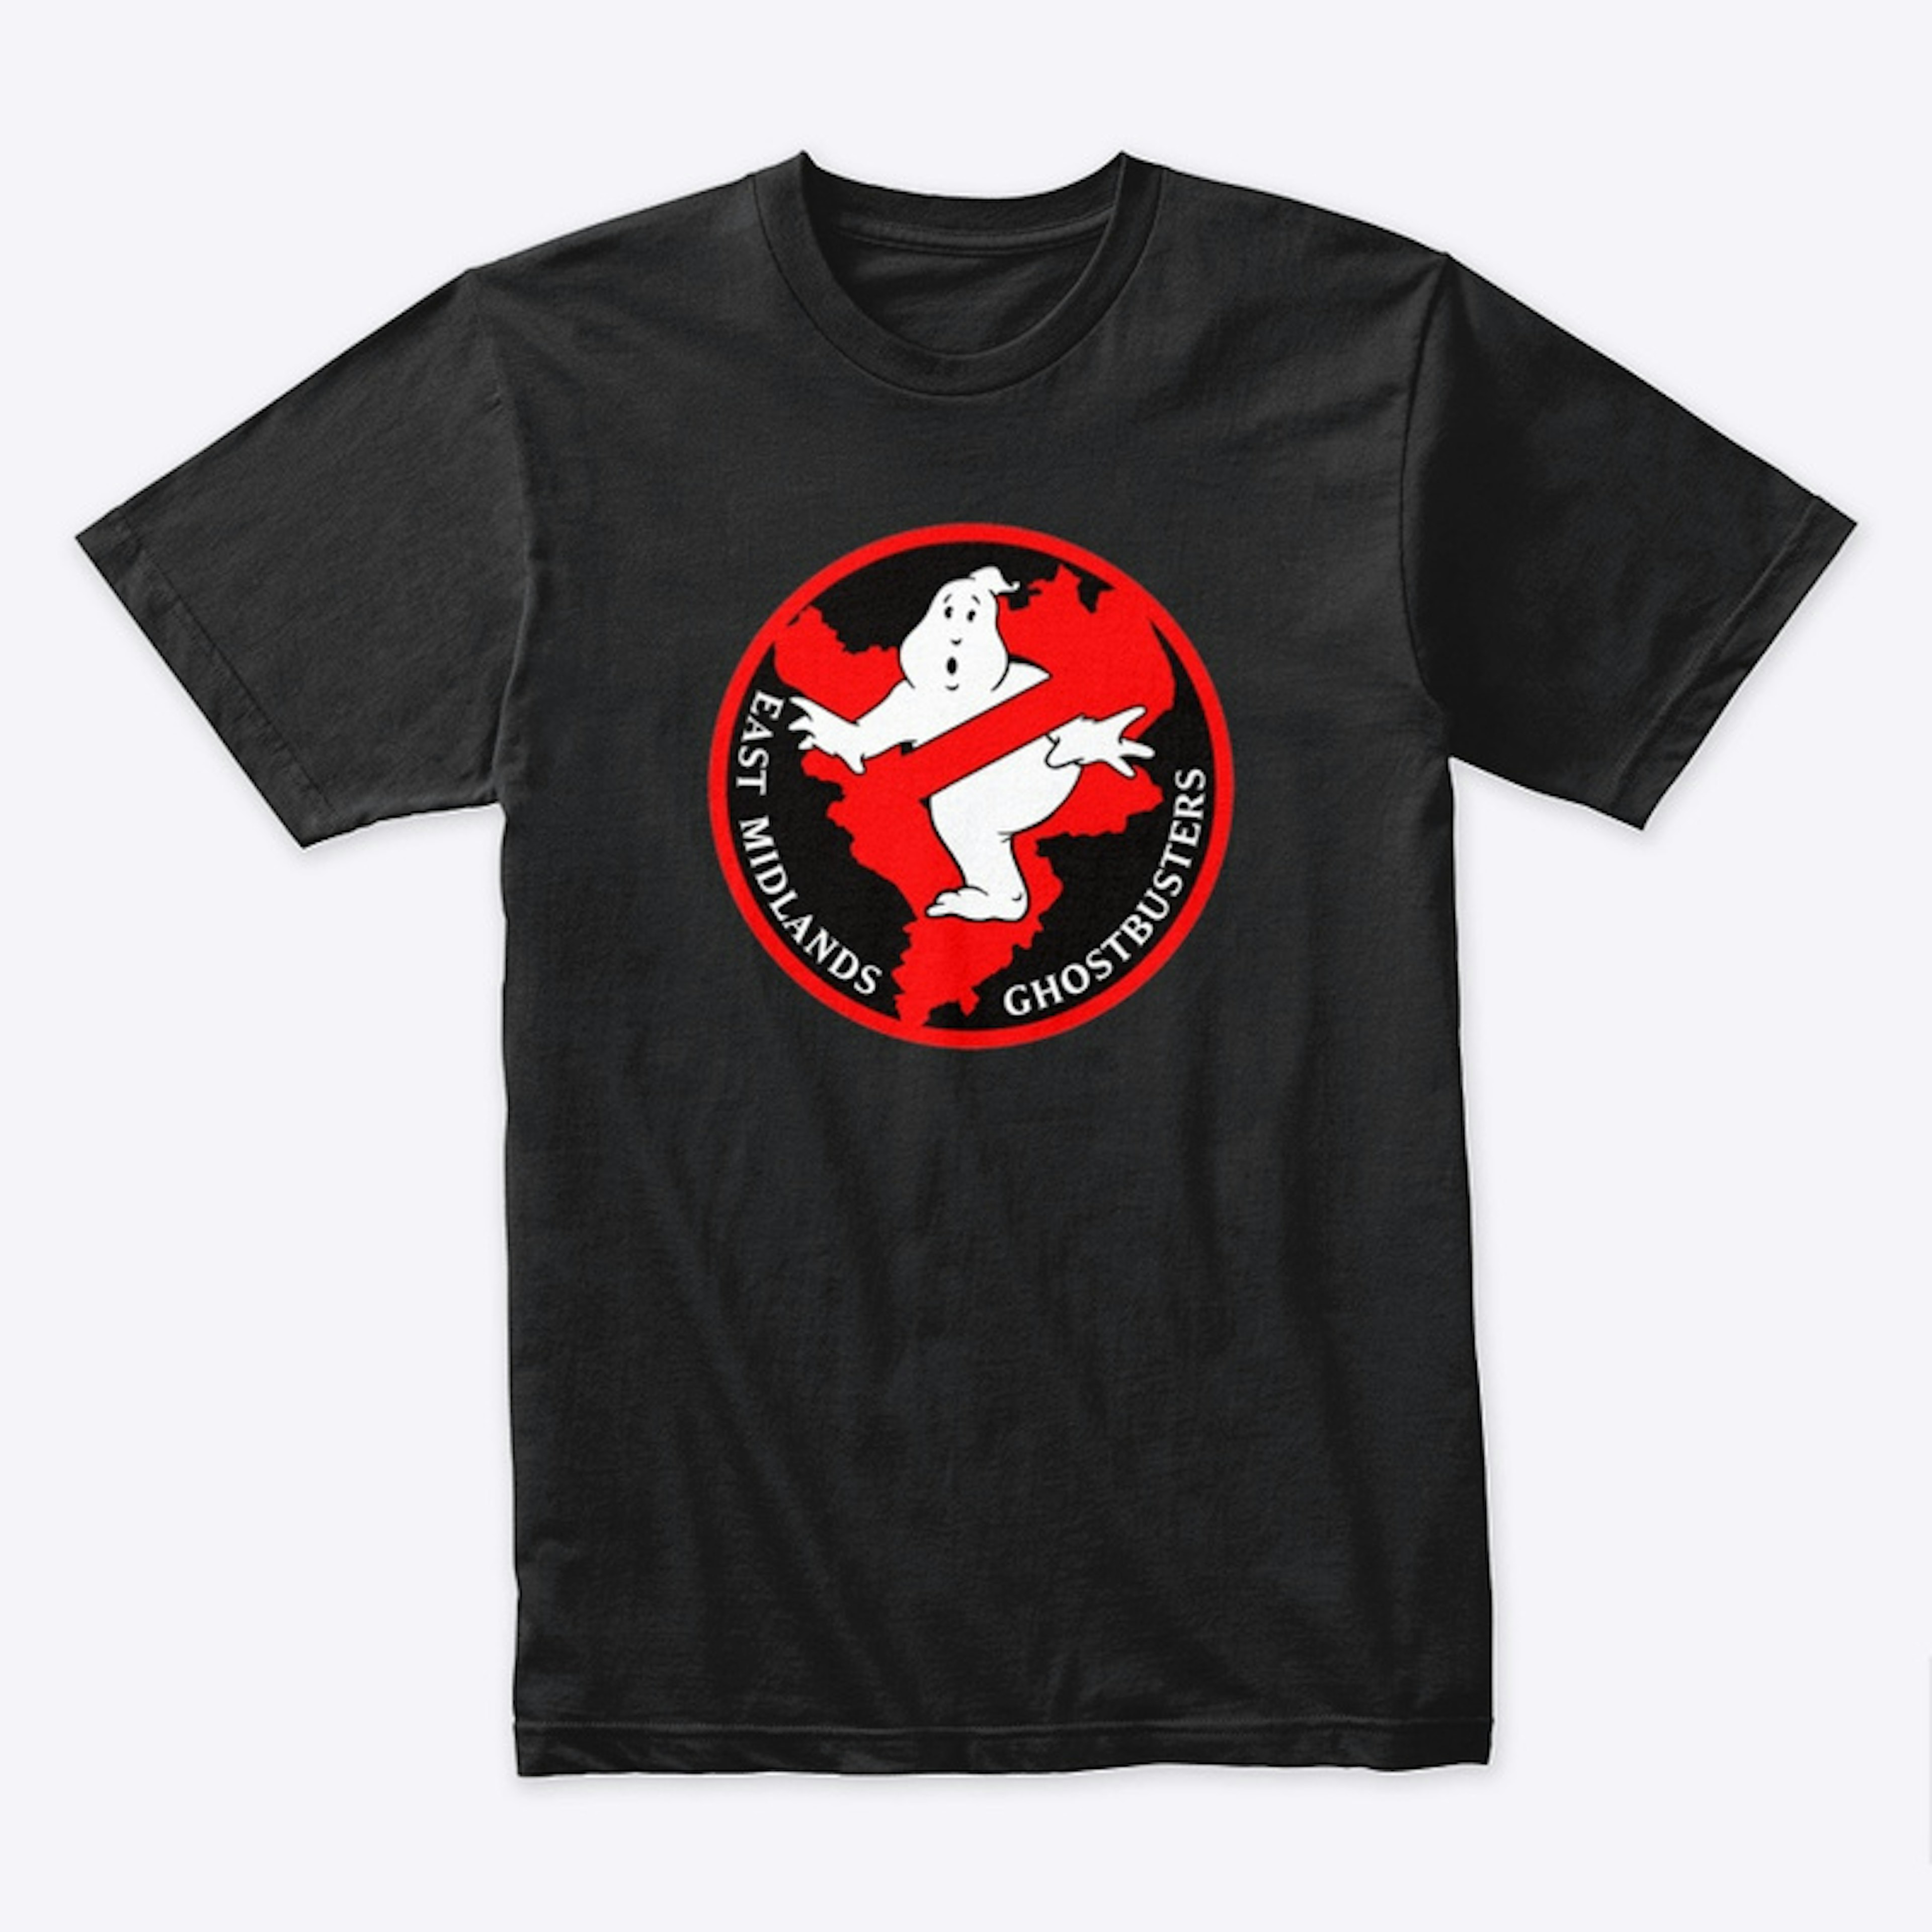 East Midlands Ghostbusters Logo T-Shirt